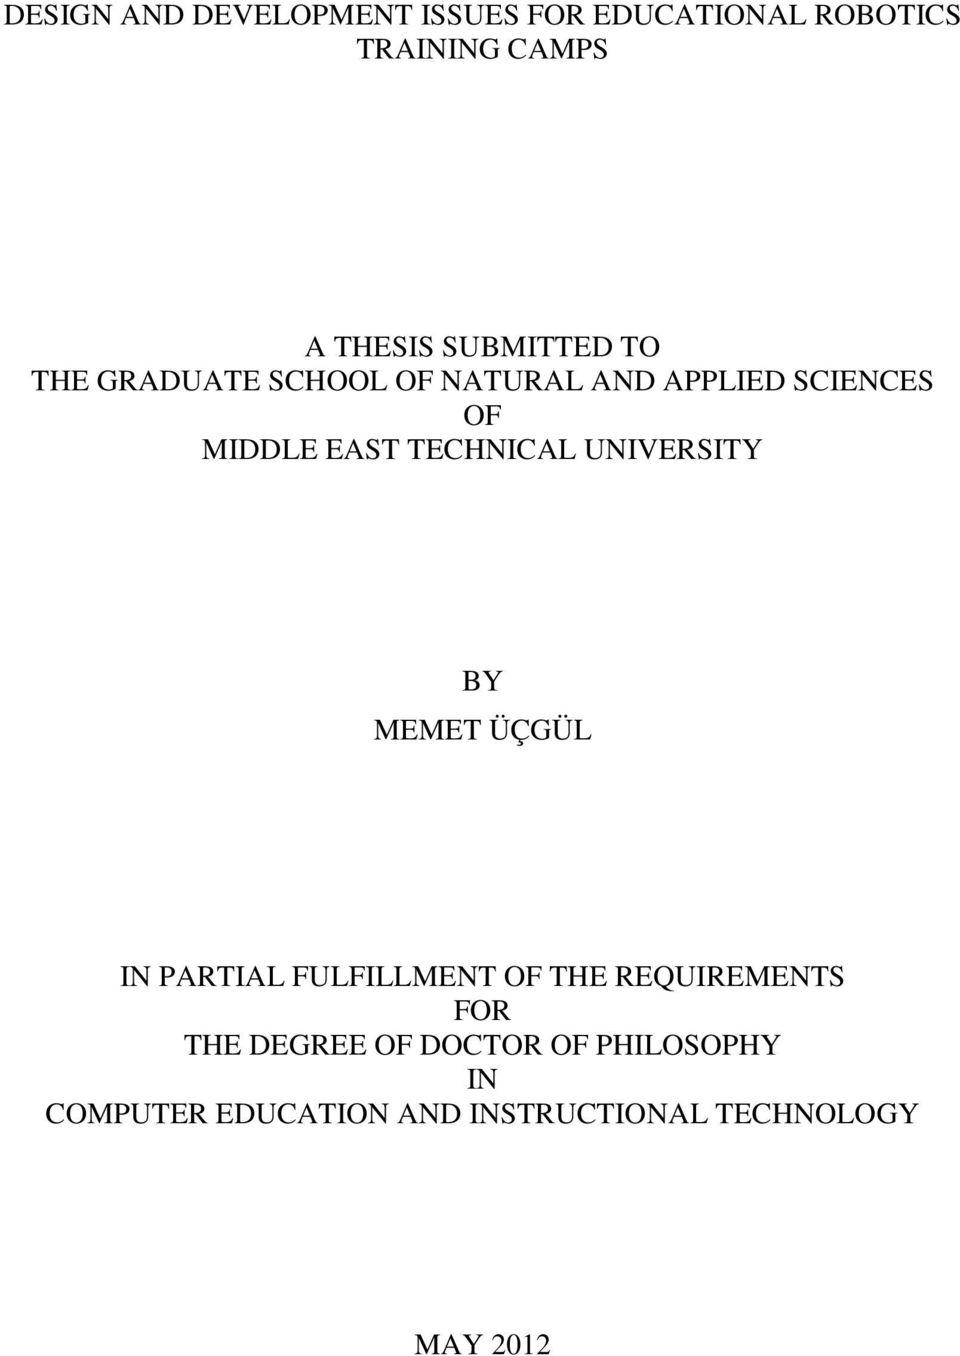 TECHNICAL UNIVERSITY BY MEMET ÜÇGÜL IN PARTIAL FULFILLMENT OF THE REQUIREMENTS FOR